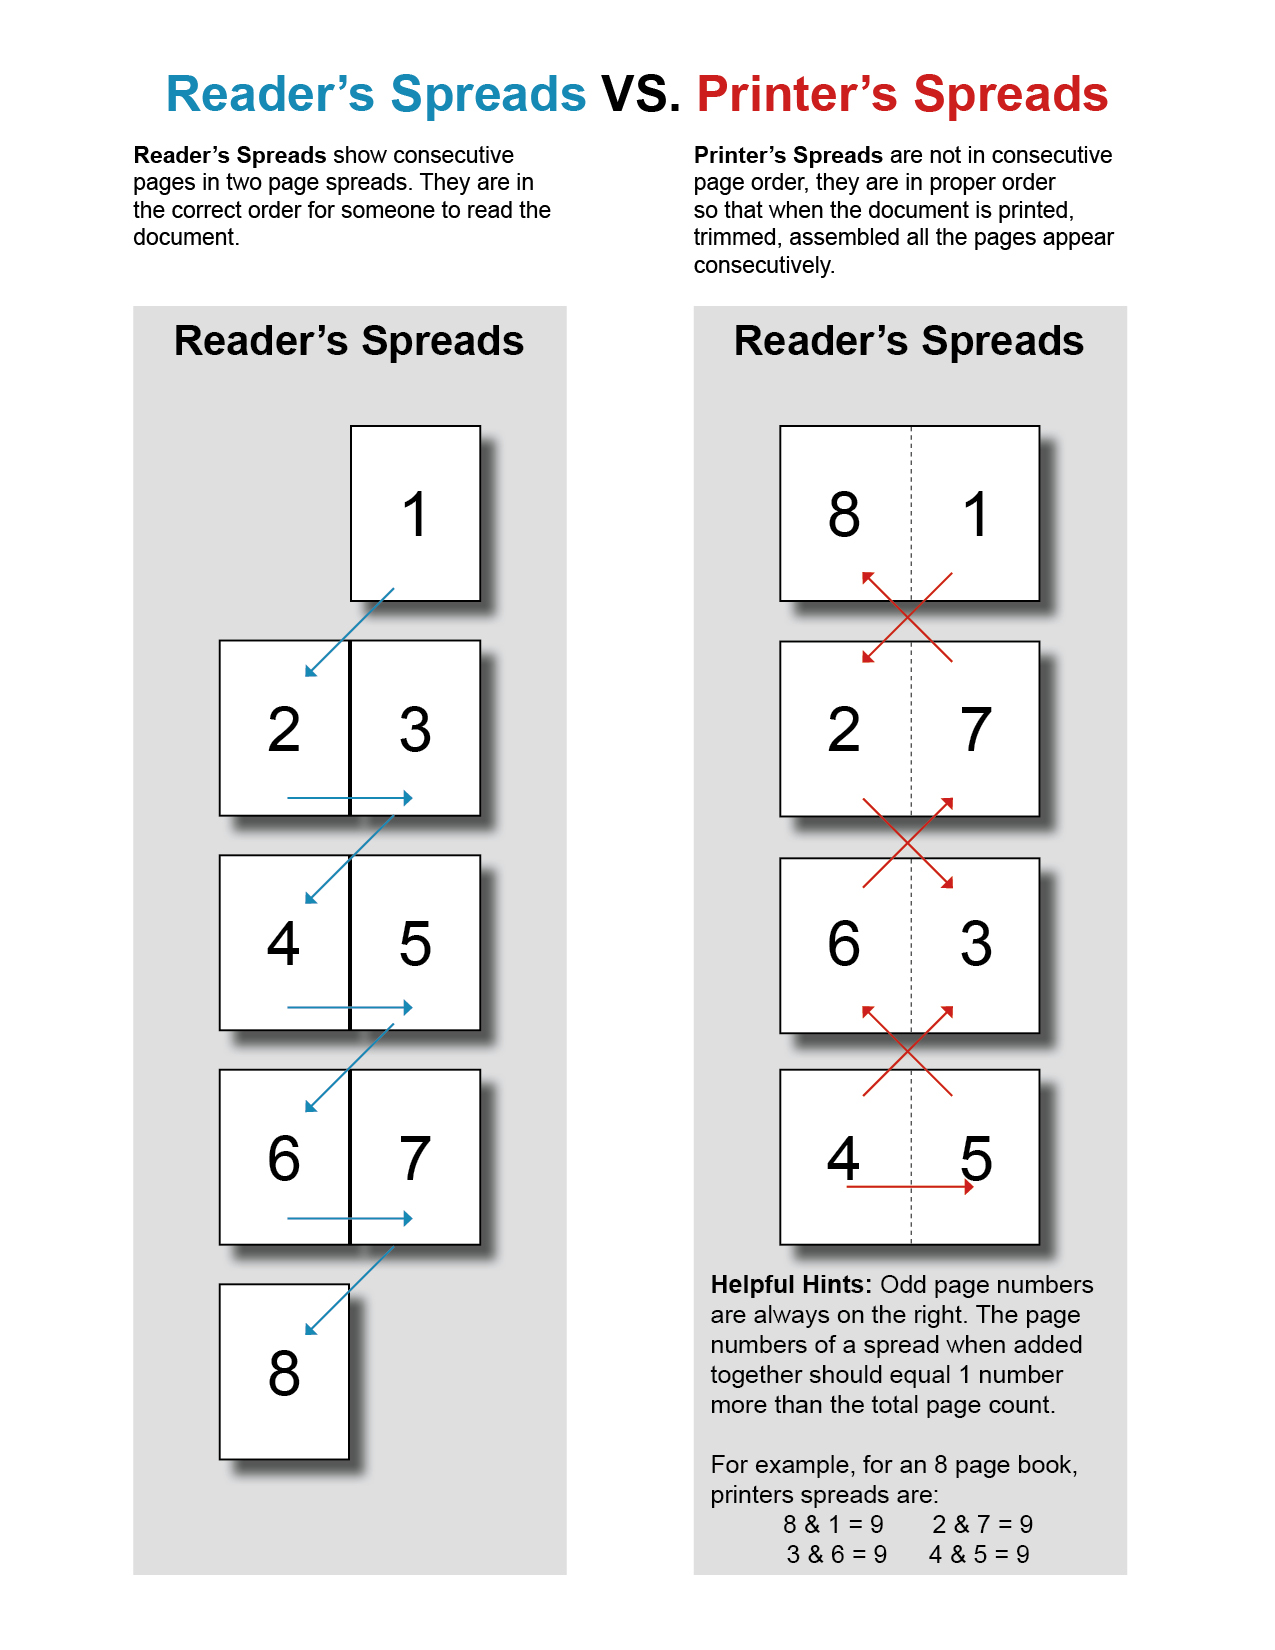 PRINTER’S SPREAD AND READER’S SPREAD IN BOOKLETS